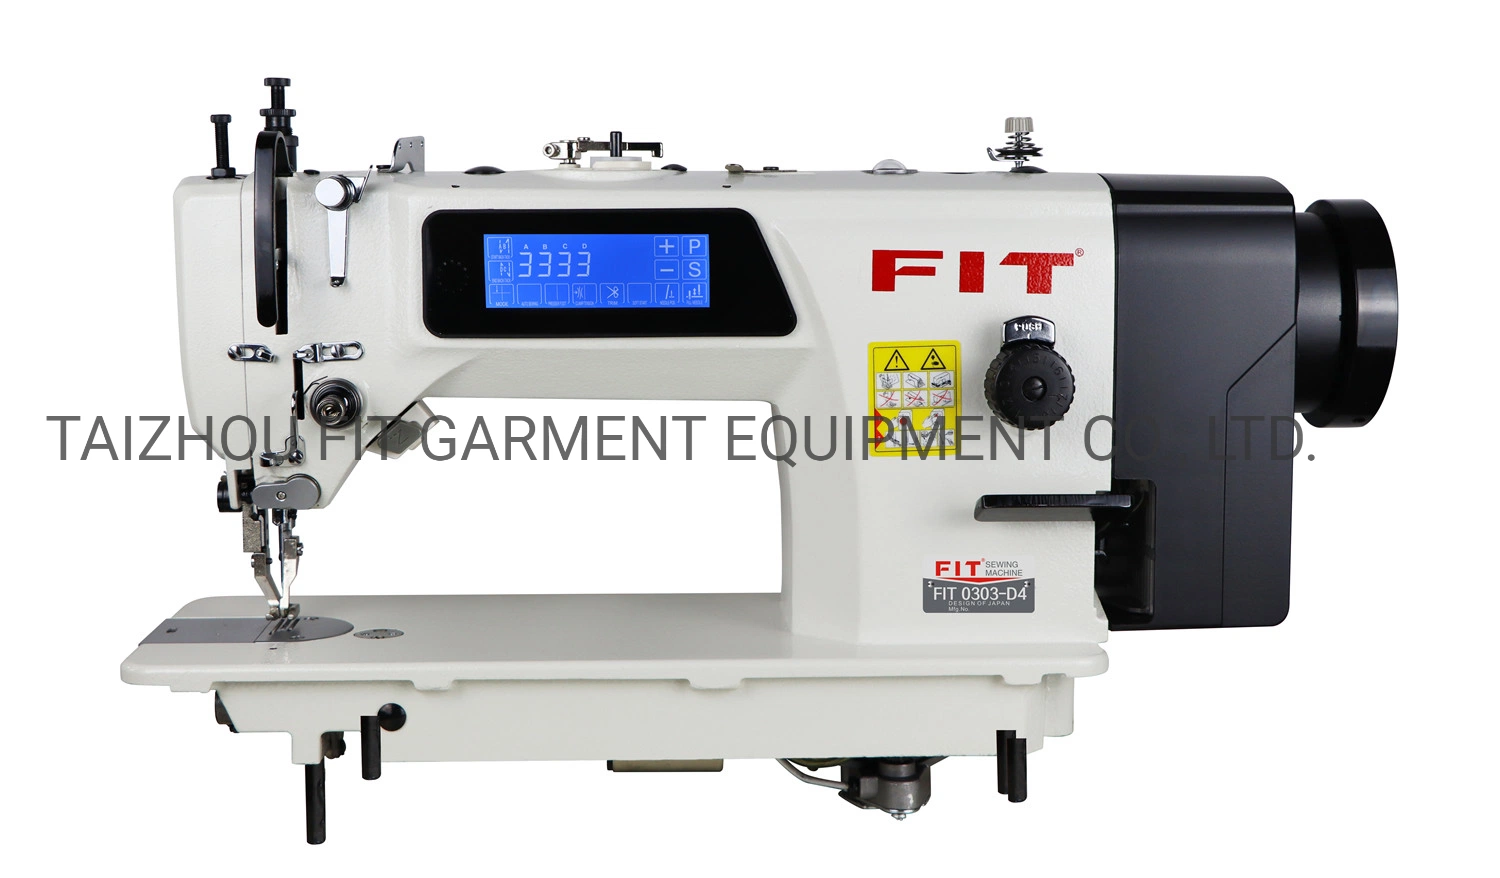 Auto Trimmer Top and Bottom Feed Industrial Sewing Machines (FIT 0303-D4)